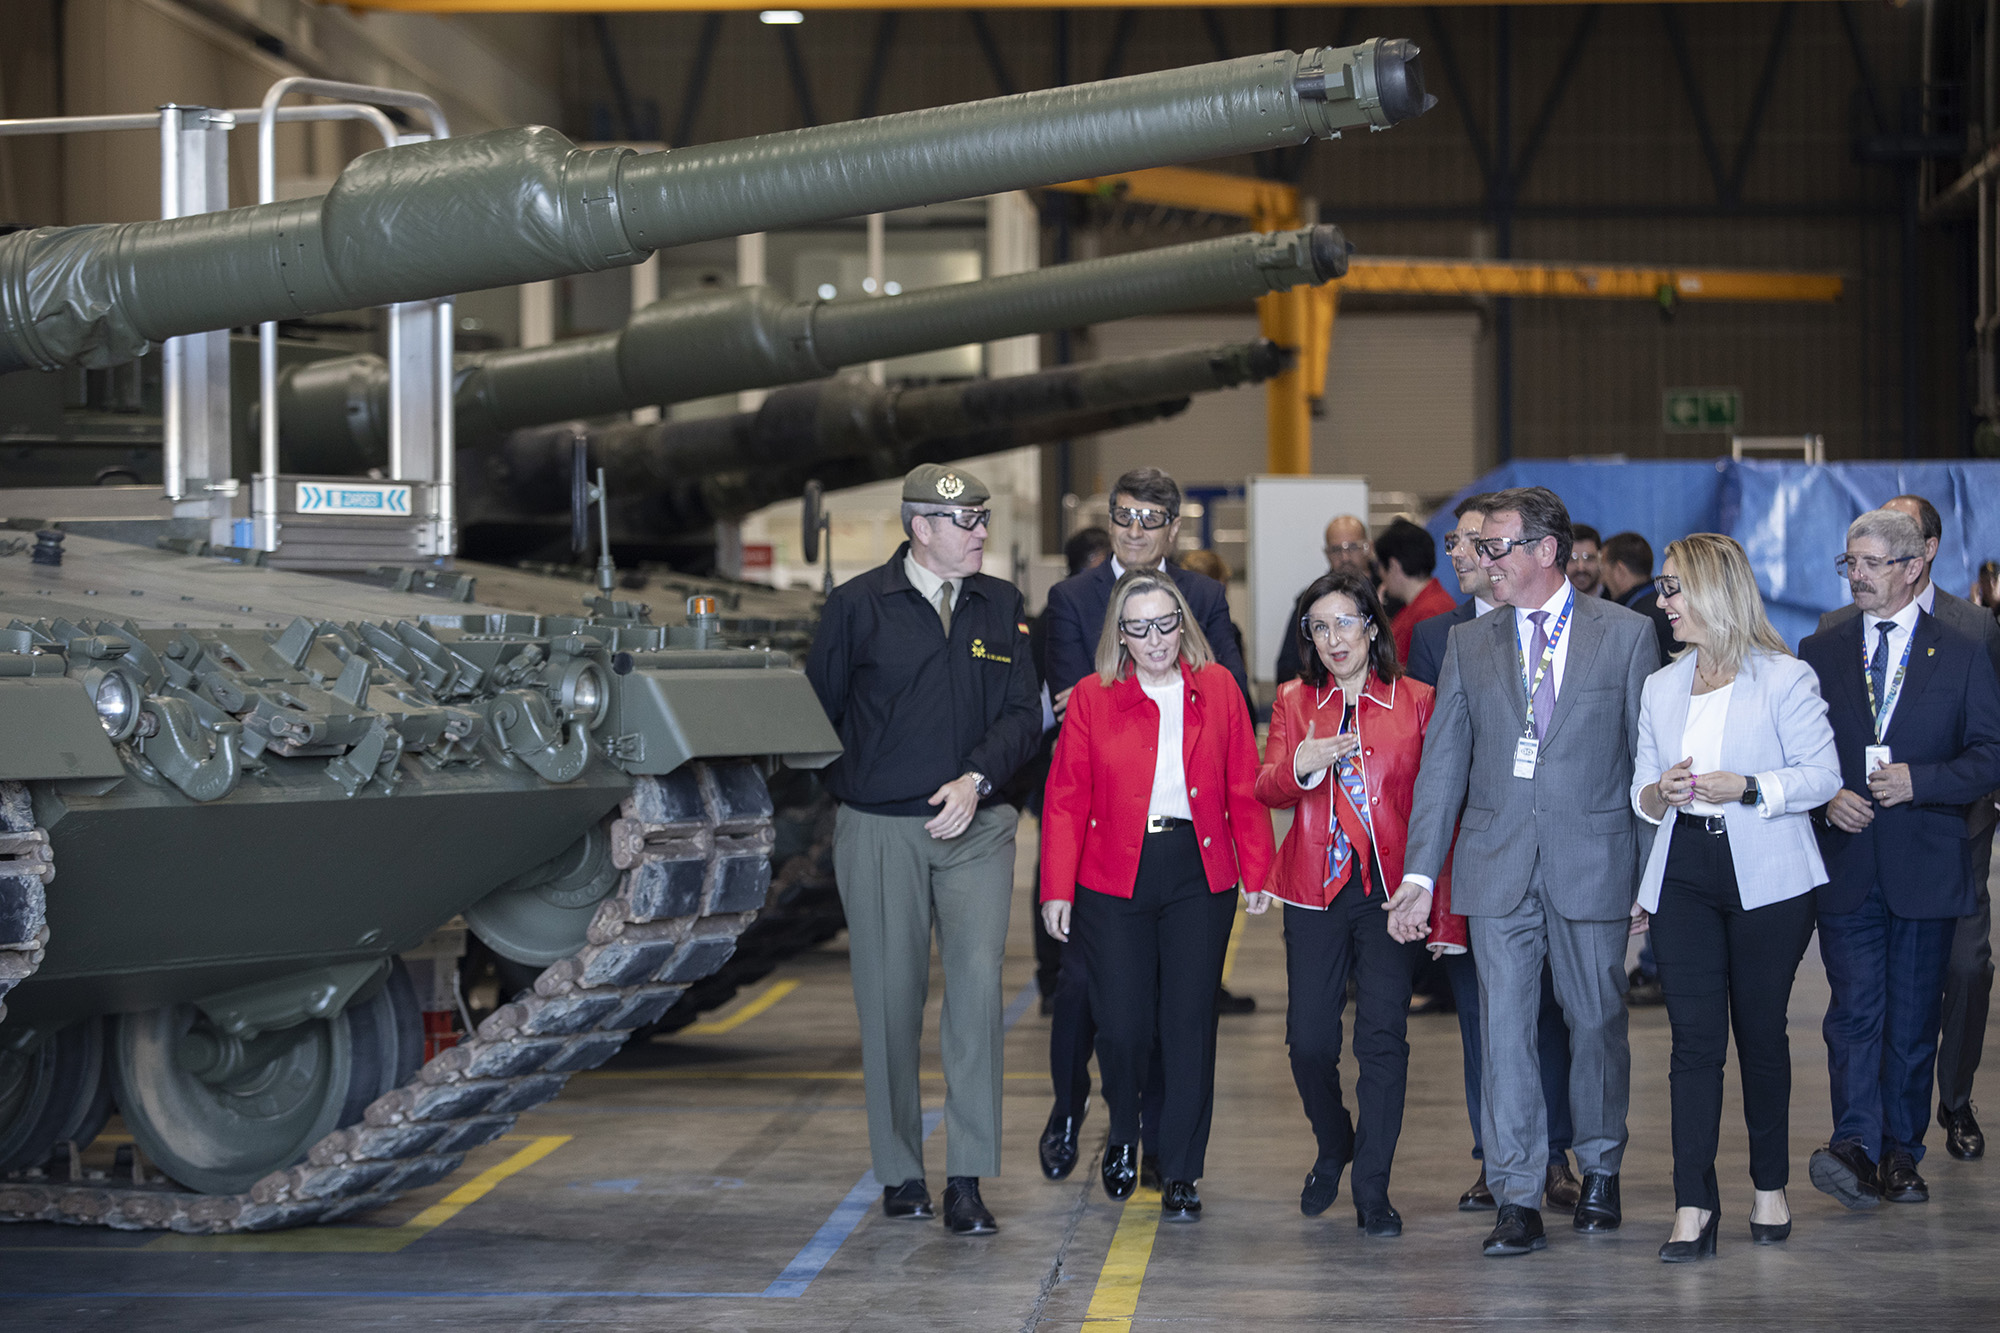 The Minister of Defense, Margarita Robles, third left, visits the Santa Barbara Sistemas plant in Seville, Spain, on March 23.